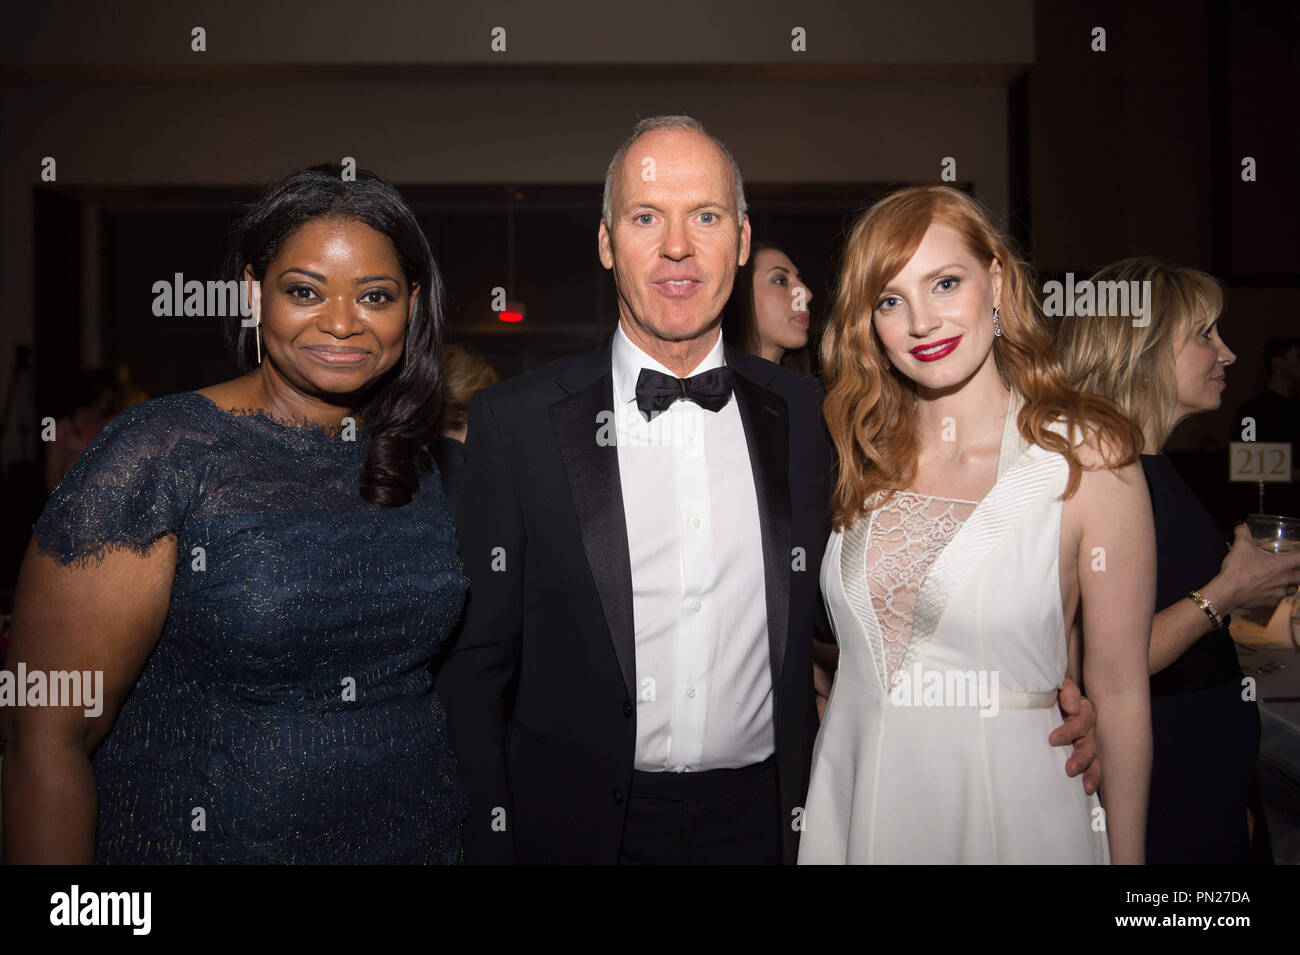 Octavia Spencer (left), Michael Keaton (center), Jessica Chastain attend the 6th Annual Governors Awards in The Ray Dolby Ballroom at Hollywood & Highland Center® in Hollywood, CA, on Saturday, November 8, 2014.  File Reference # 32487 179THA  For Editorial Use Only -  All Rights Reserved Stock Photo